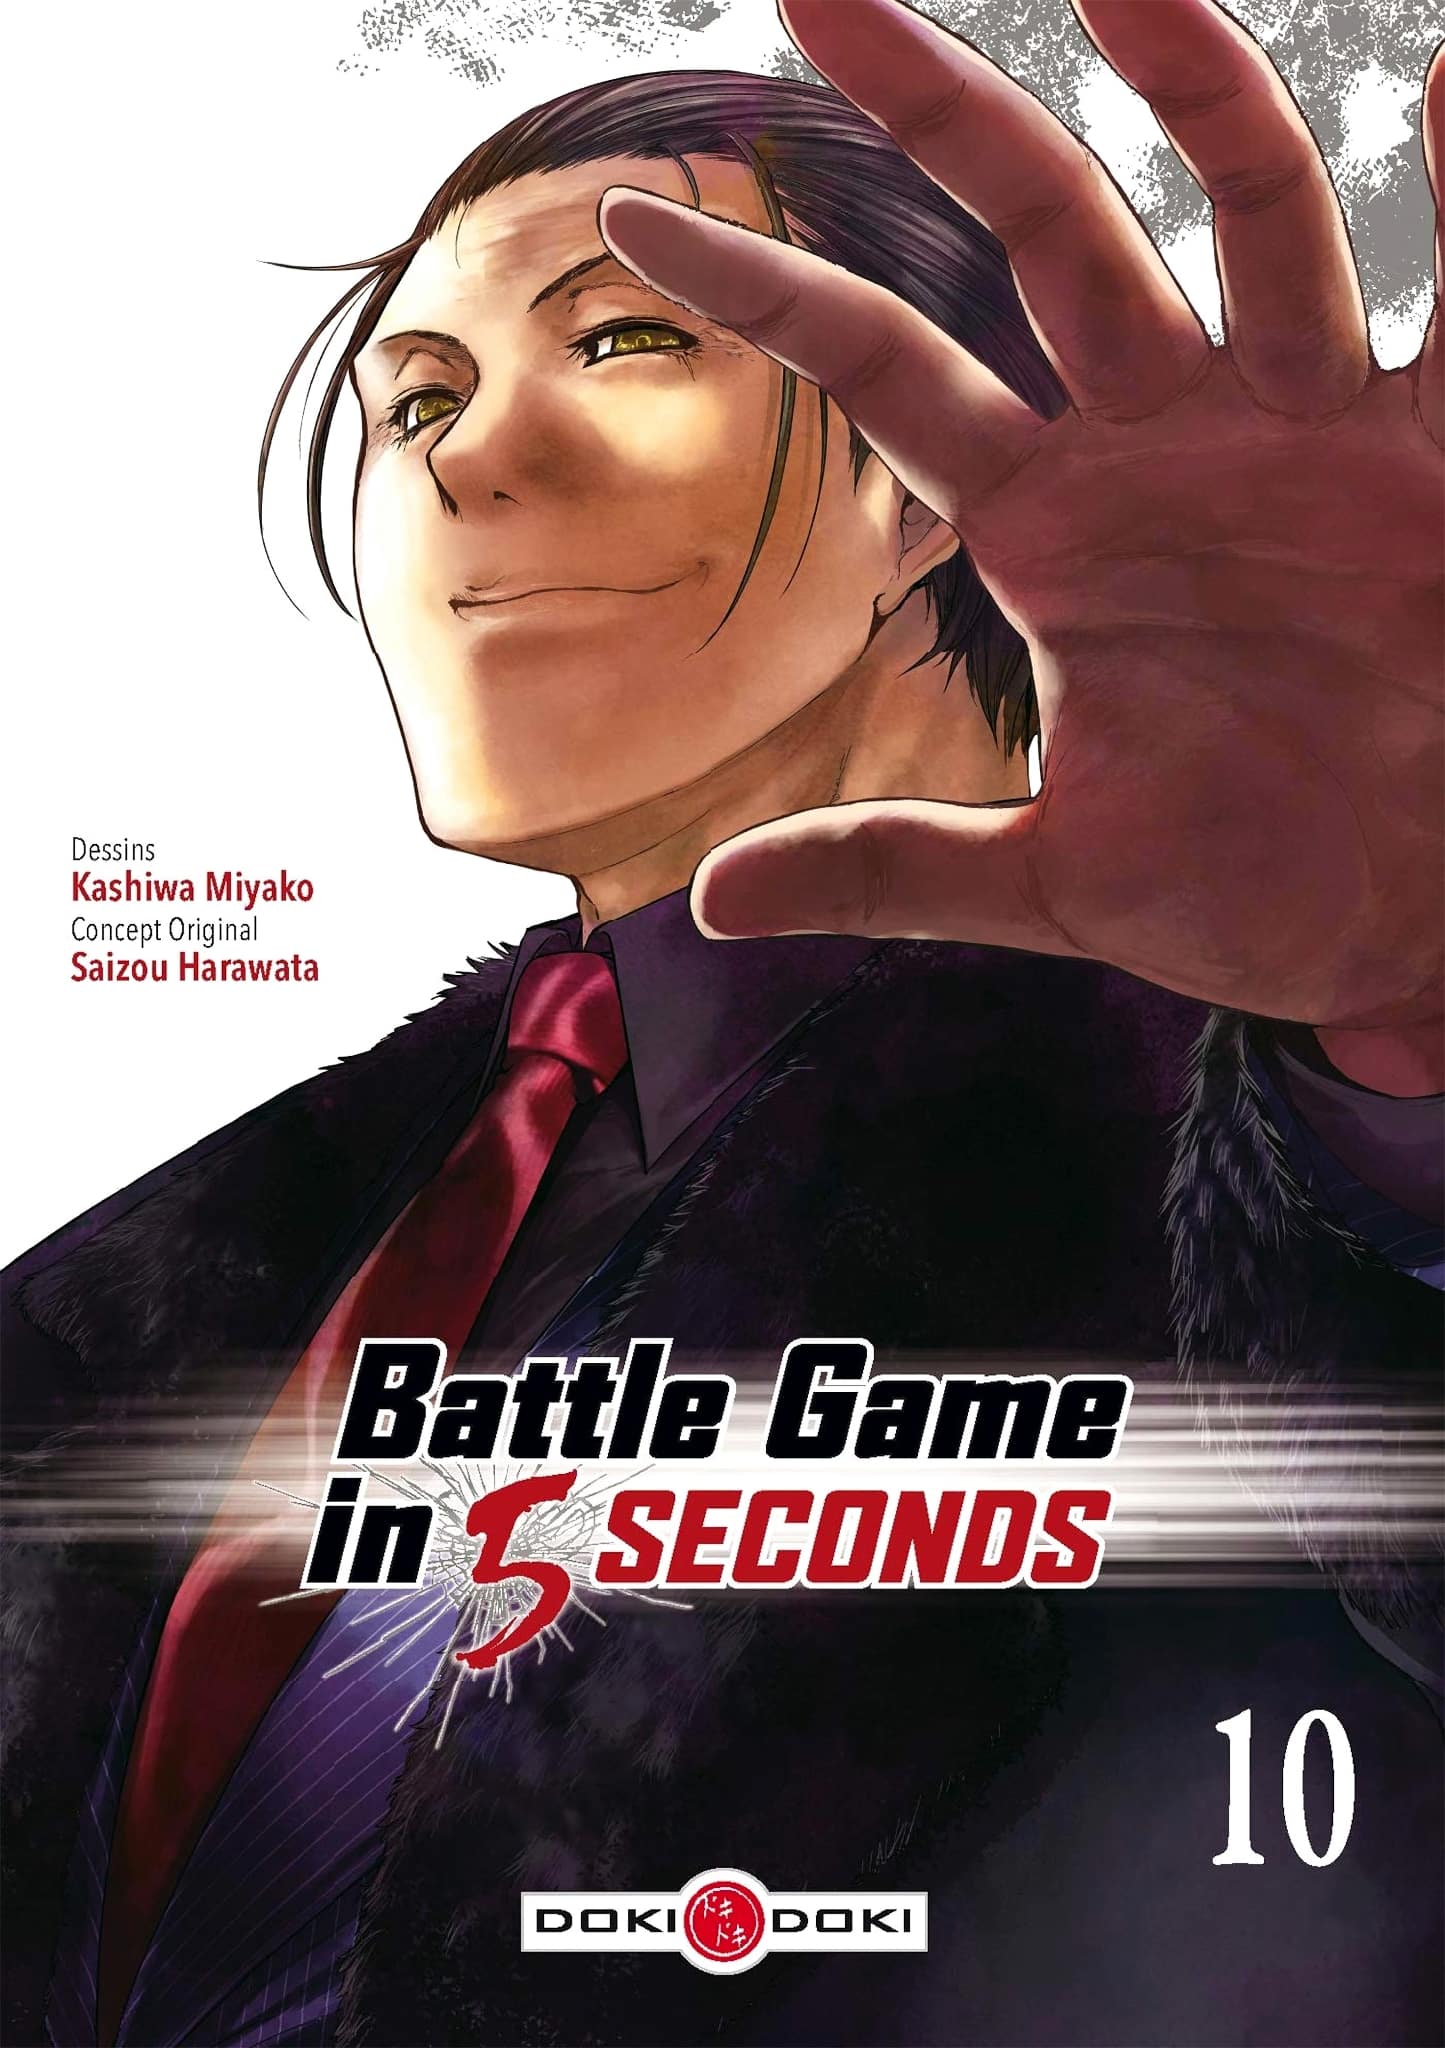 Tome 10 du manga Battle Game in 5 Seconds